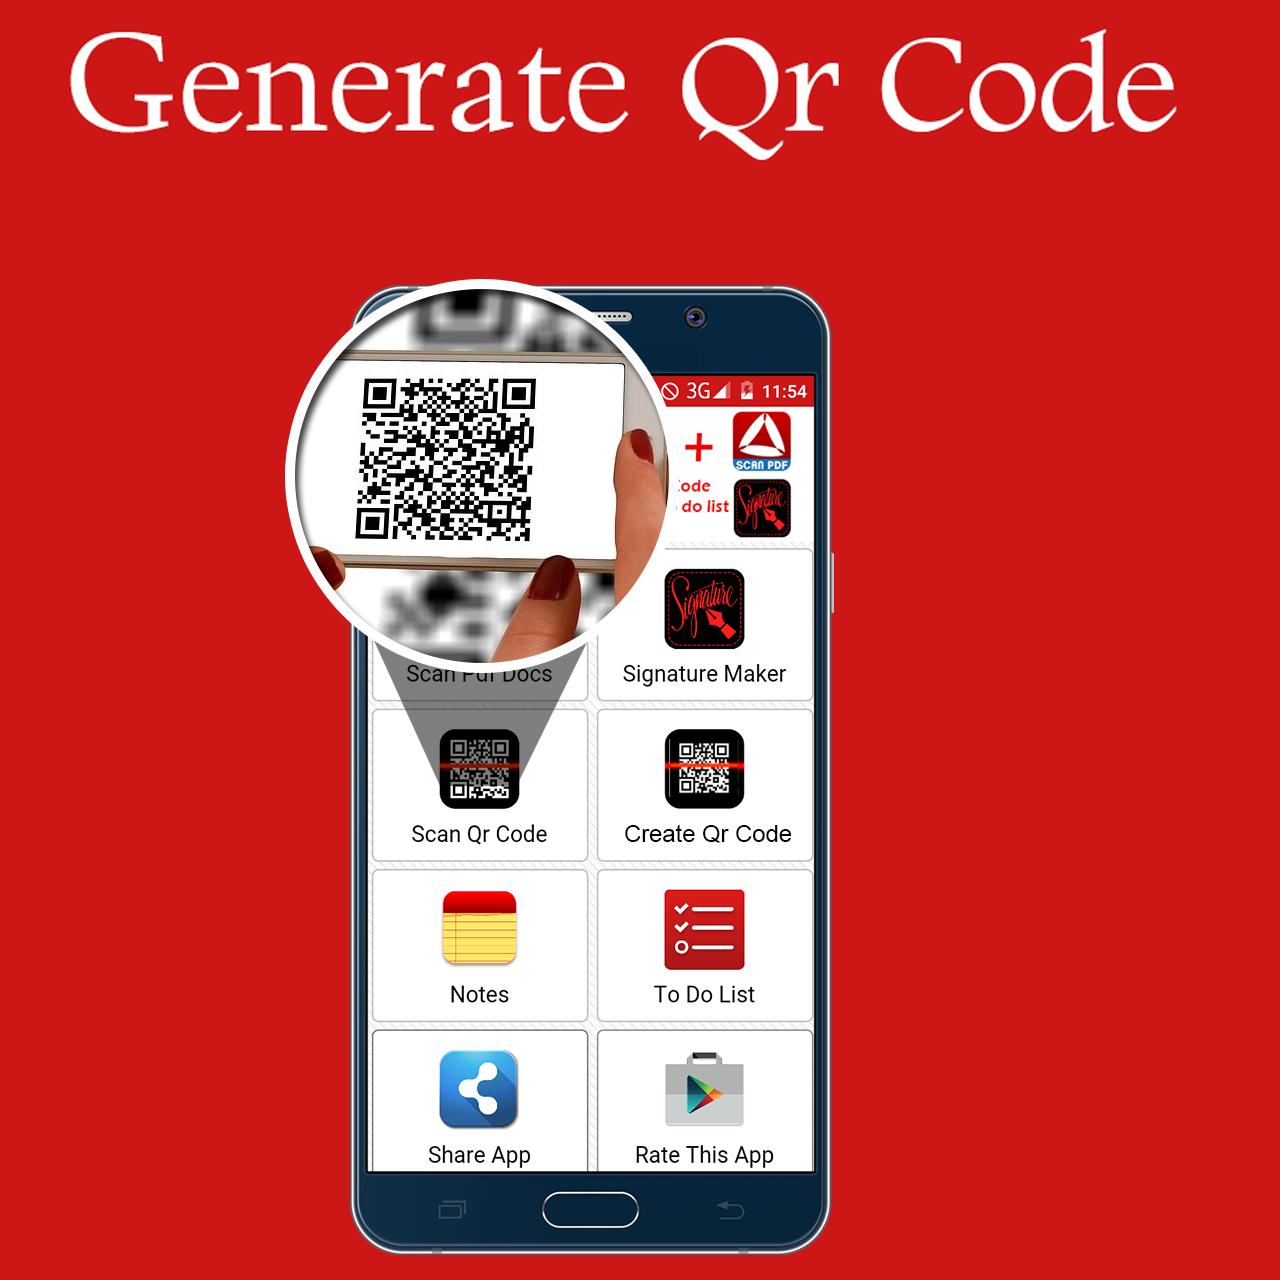 Scan All in One + (PDF, doc bar qr Notes) Free for Android - APK Download